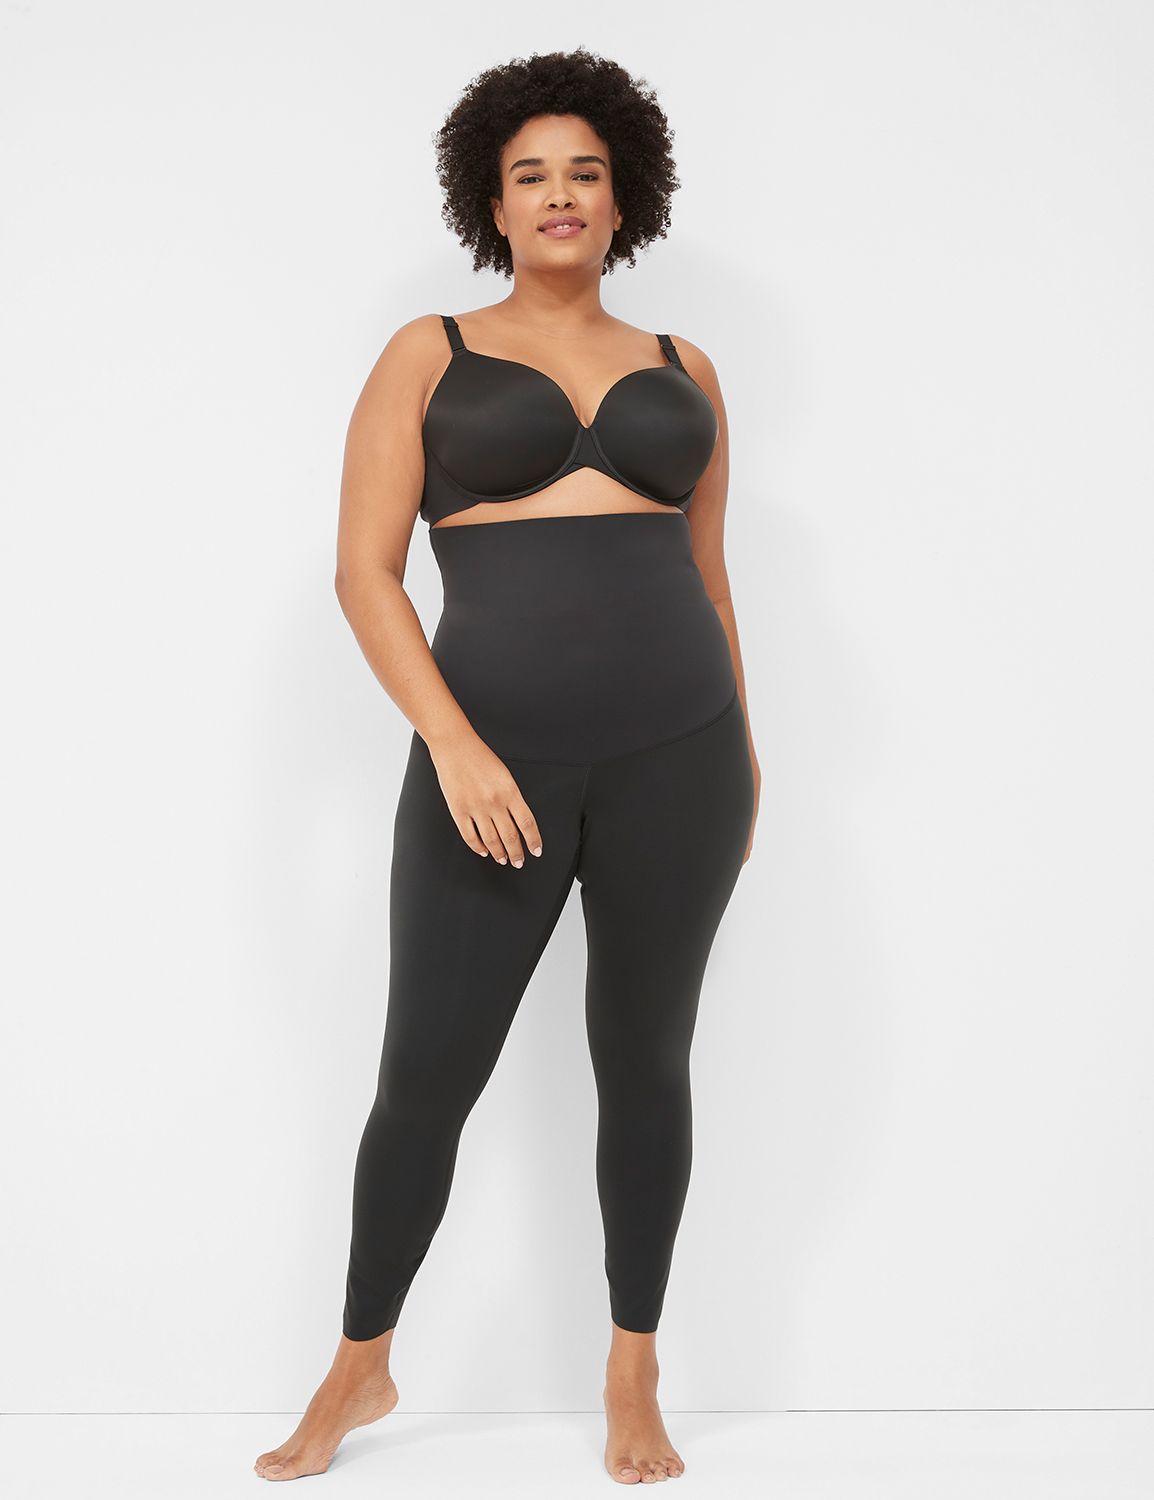 Cacique Black Shapewear for Women for sale